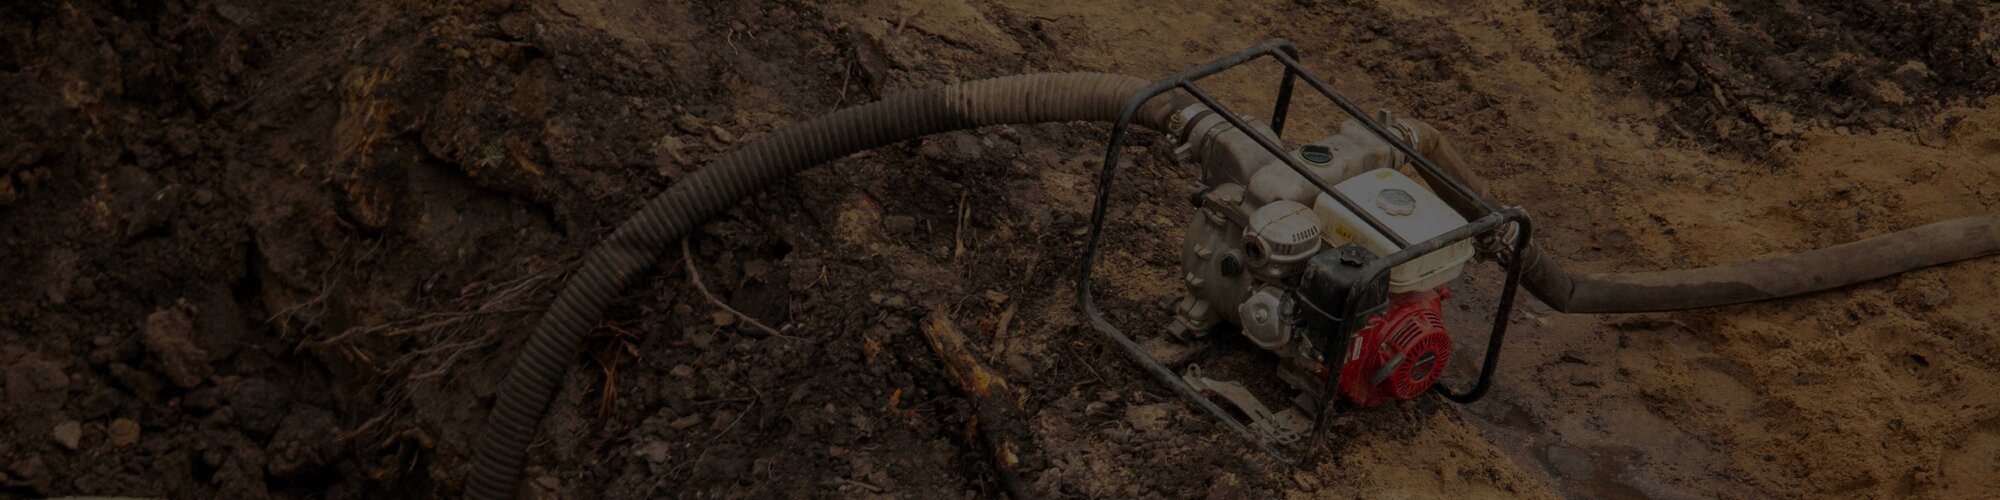 A centrifugal pump sitting on the edge of a hole in the dirt